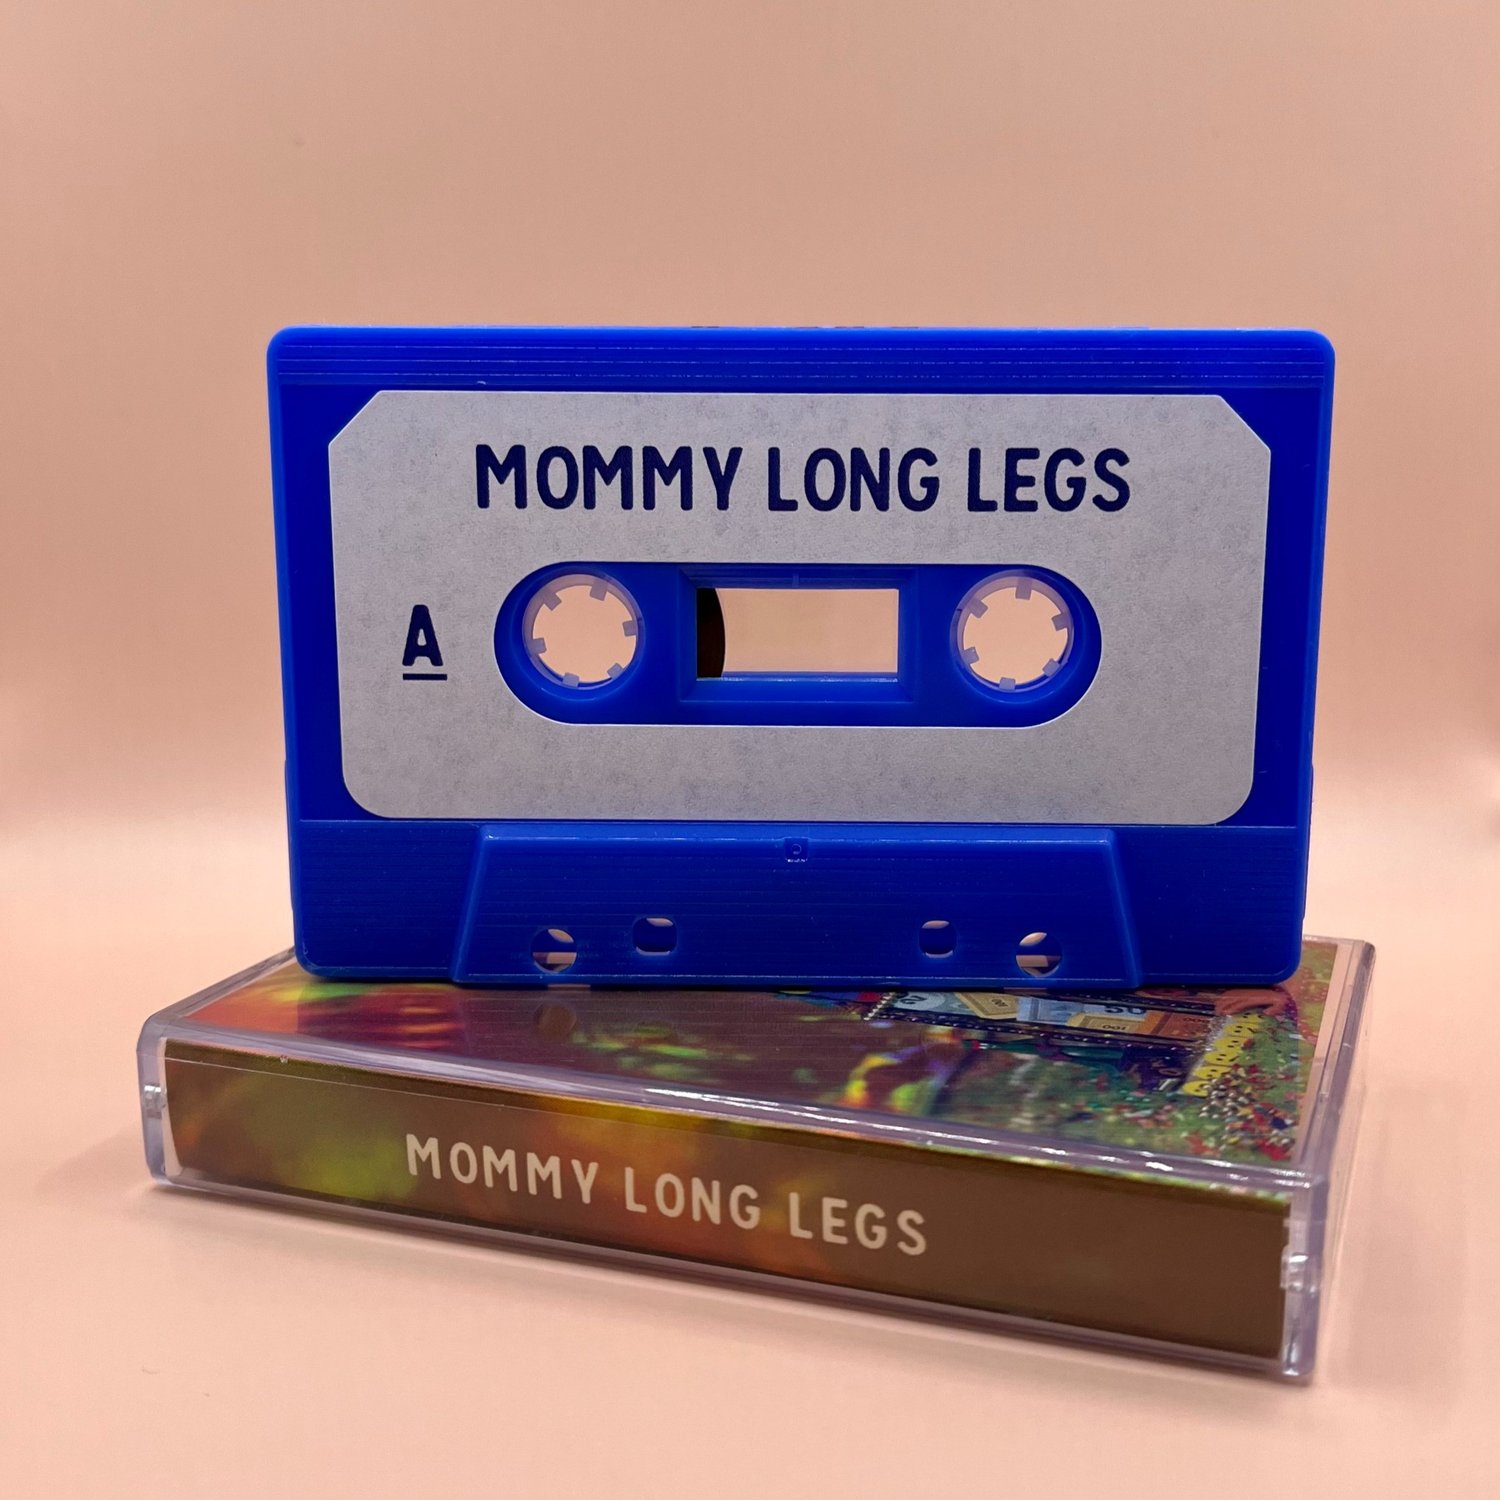 Mommy Long Legs - Rock Product EP 7